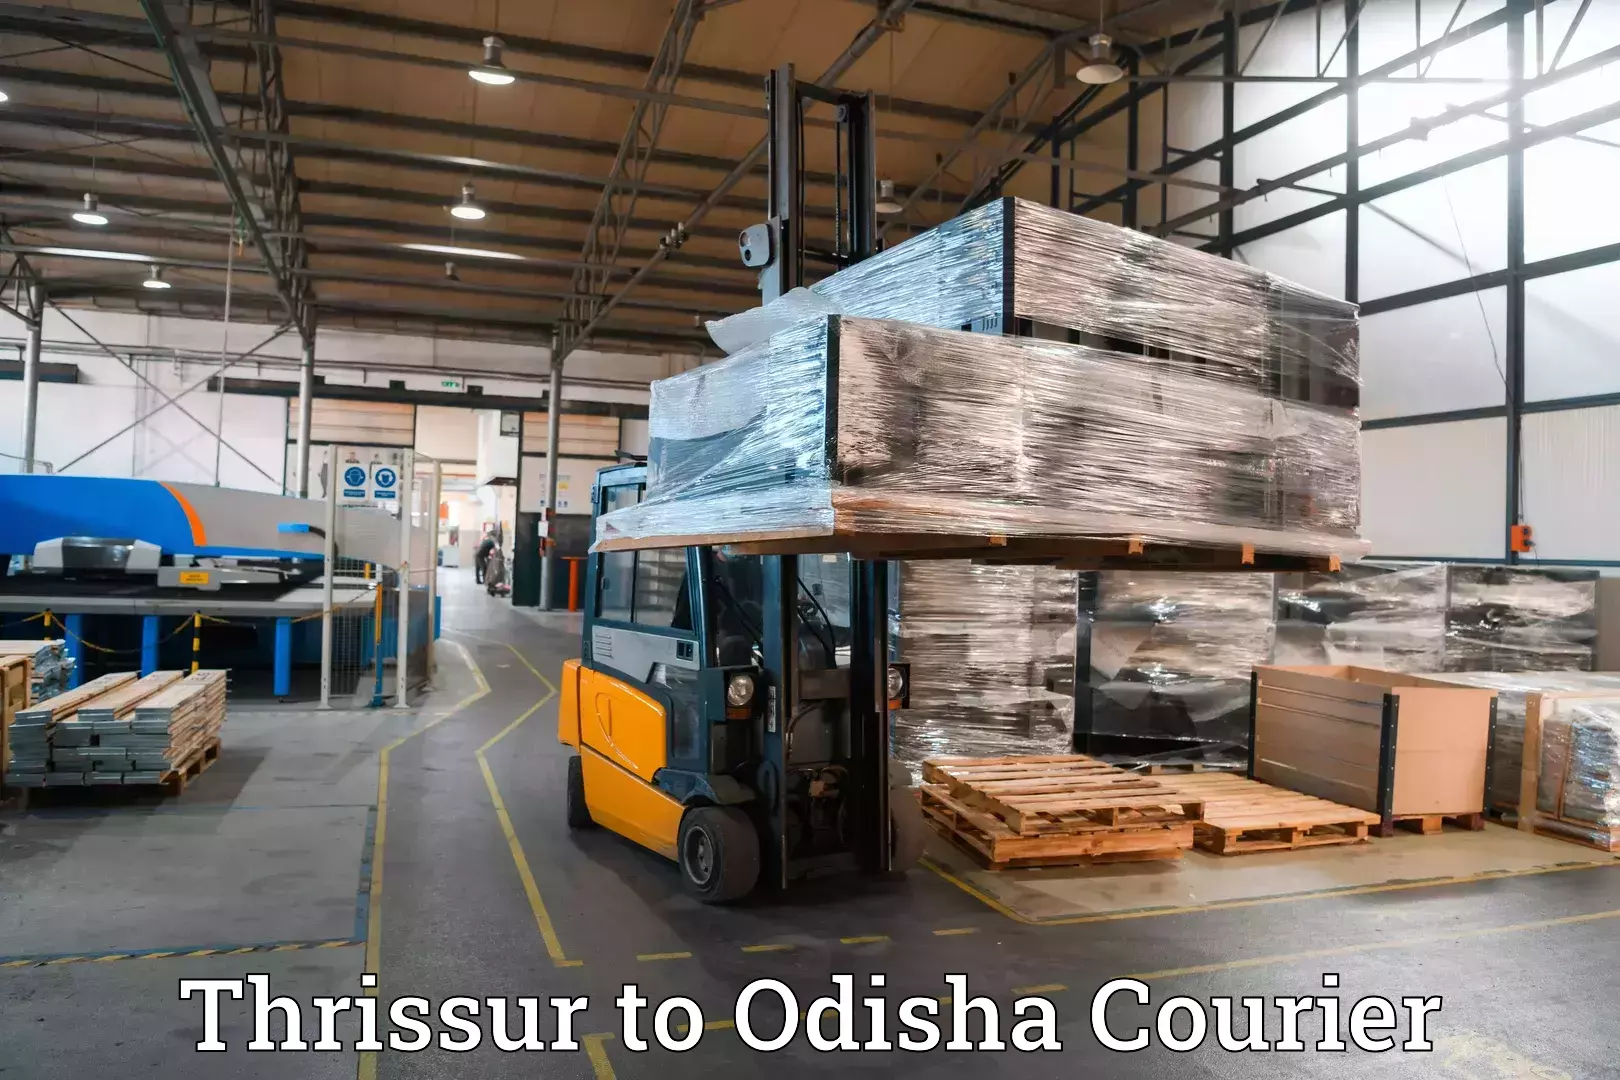 Baggage shipping experts Thrissur to Odisha